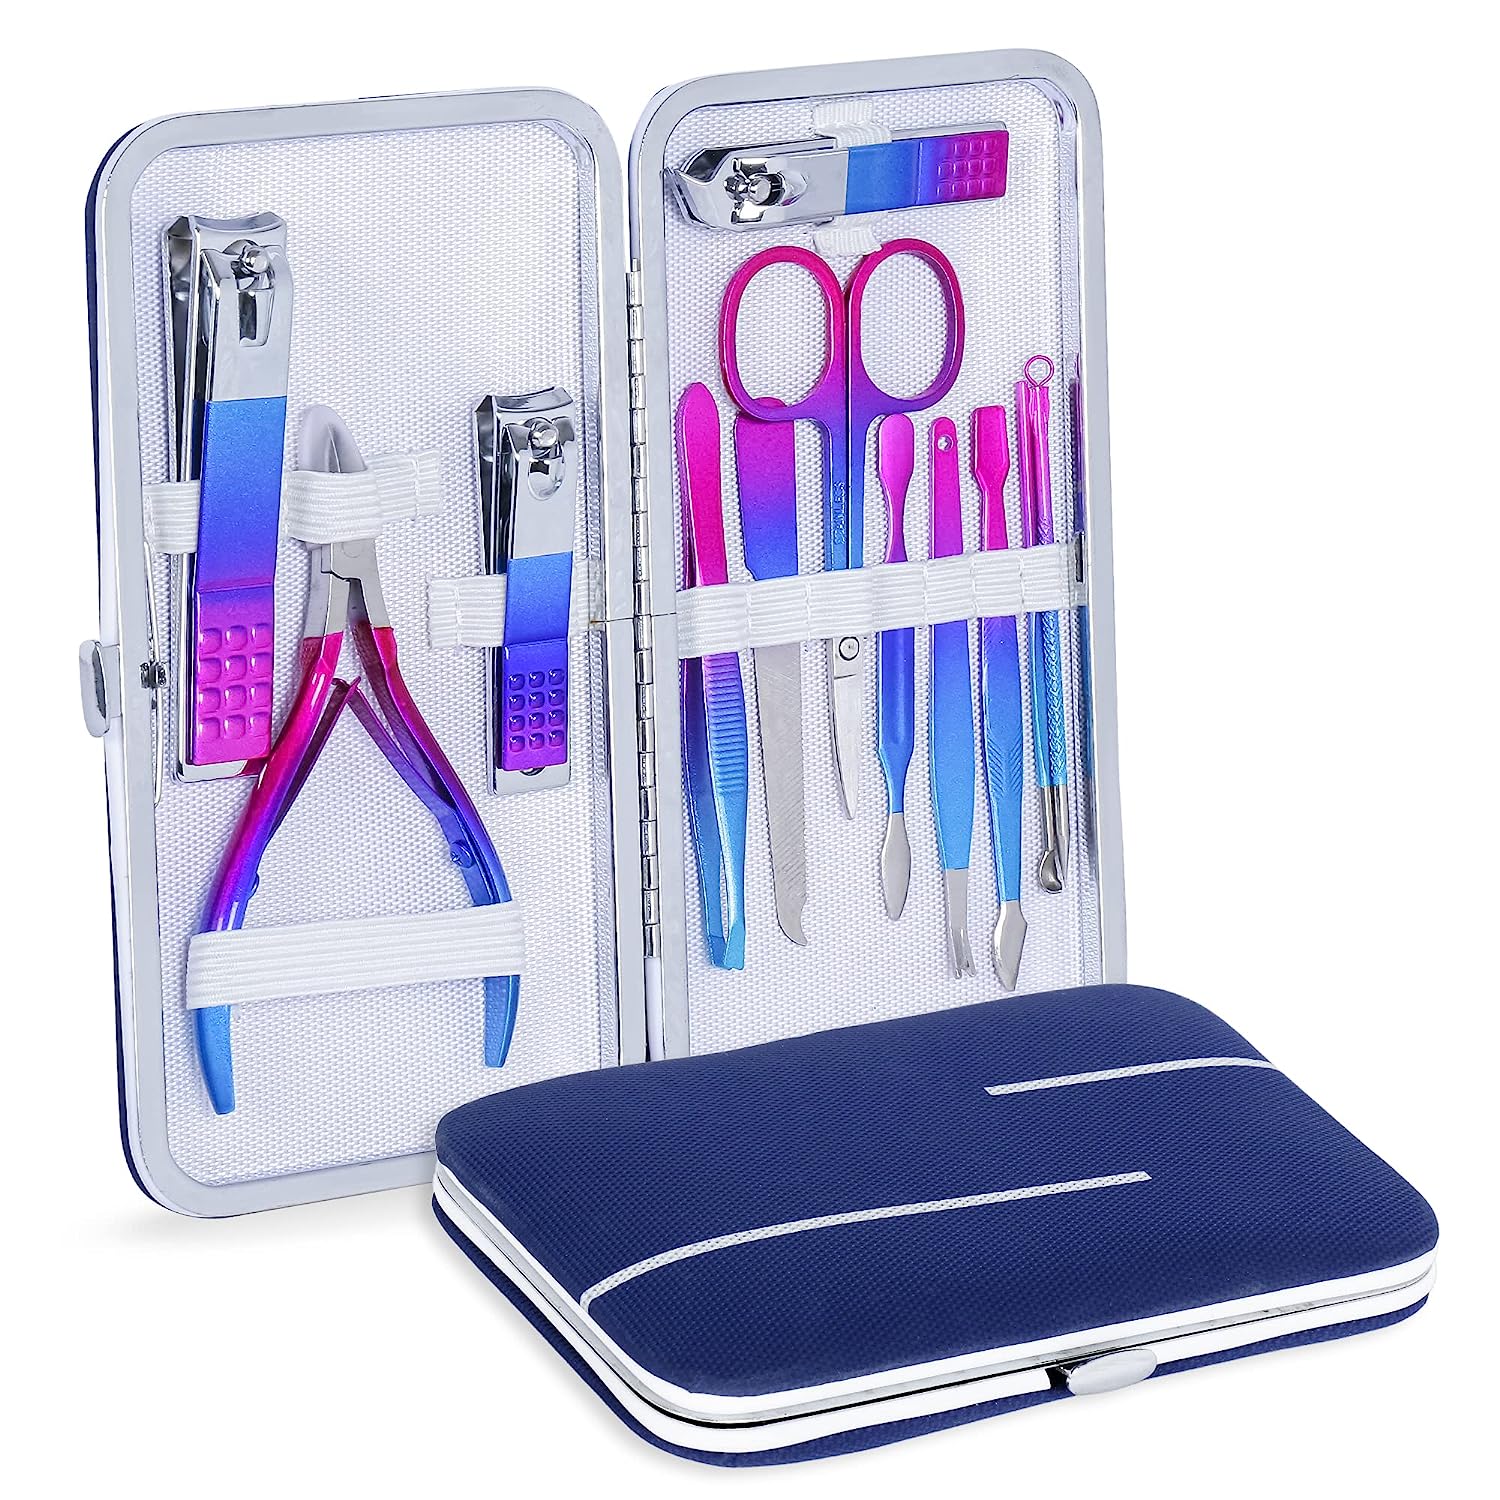 LuvLap Baby Grooming Scissors & Nail Clipper Set/Kit, Manicure Set, 4pcs,  0m+ - Price in India, Buy LuvLap Baby Grooming Scissors & Nail Clipper Set/ Kit, Manicure Set, 4pcs, 0m+ Online In India,